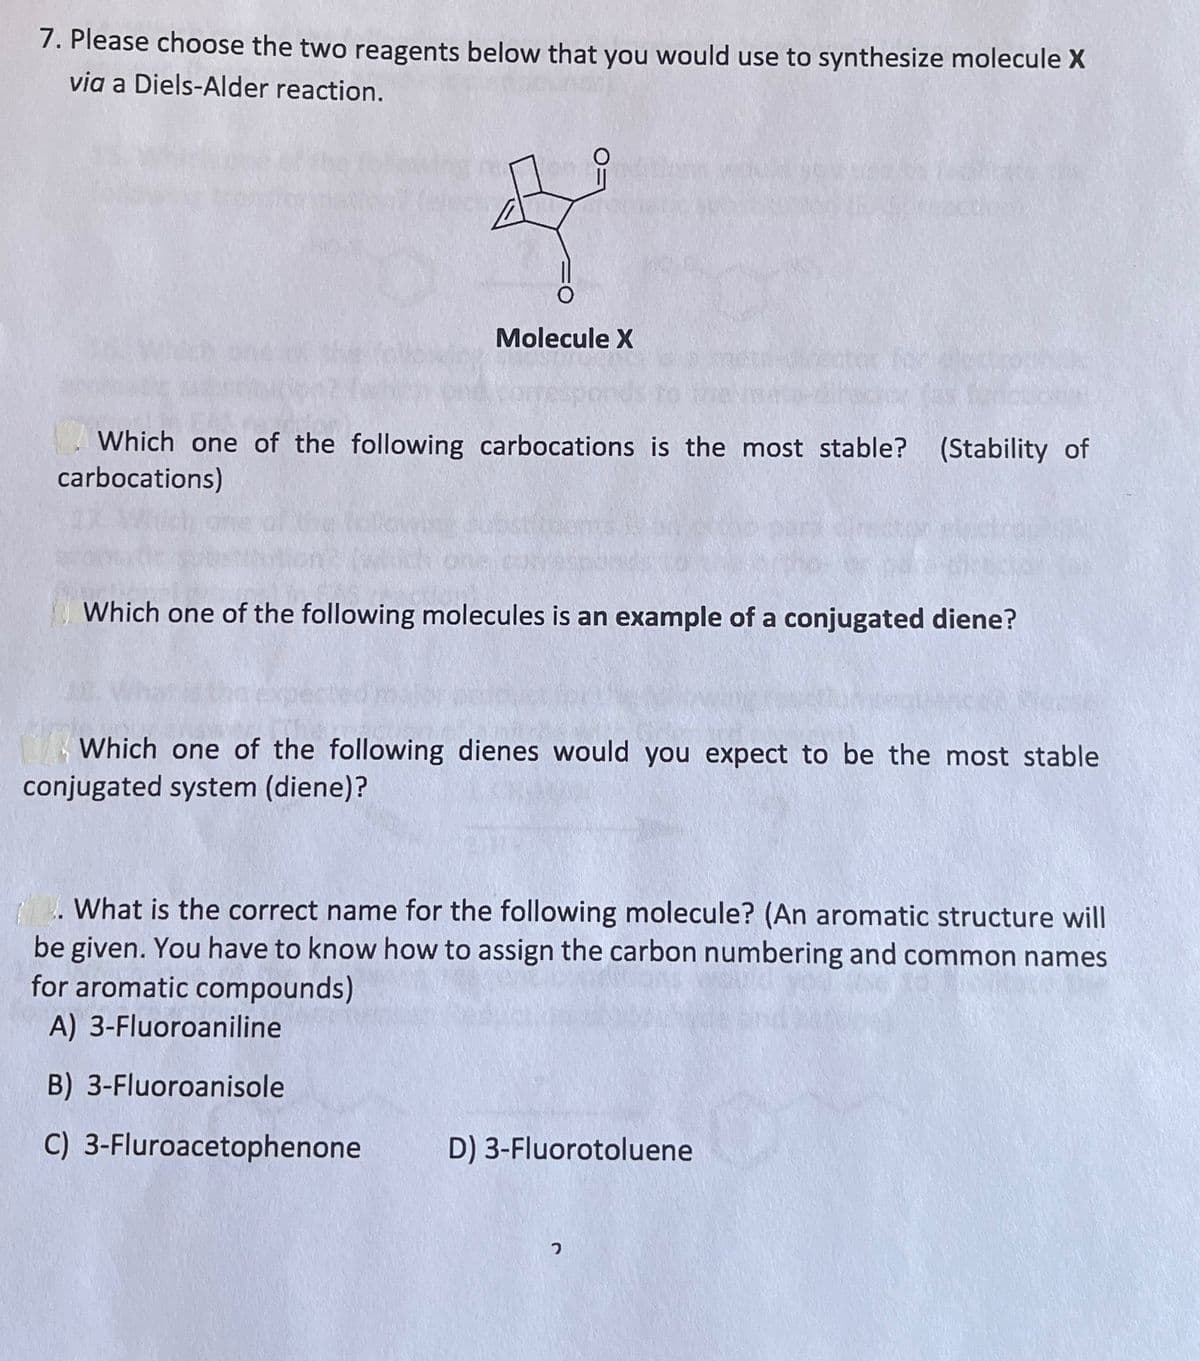 7. Please choose the two reagents below that you would use to synthesize molecule X
via a Diels-Alder reaction.
Molecule X
Which one of the following carbocations is the most stable? (Stability of
carbocations)
Which one of the following molecules is an example of a conjugated diene?
Which one of the following dienes would you expect to be the most stable
conjugated system (diene)?
. What is the correct name for the following molecule? (An aromatic structure will
be given. You have to know how to assign the carbon numbering and common names
for aromatic compounds)
A) 3-Fluoroaniline
B) 3-Fluoroanisole
C) 3-Fluroacetophenone
D) 3-Fluorotoluene
ว